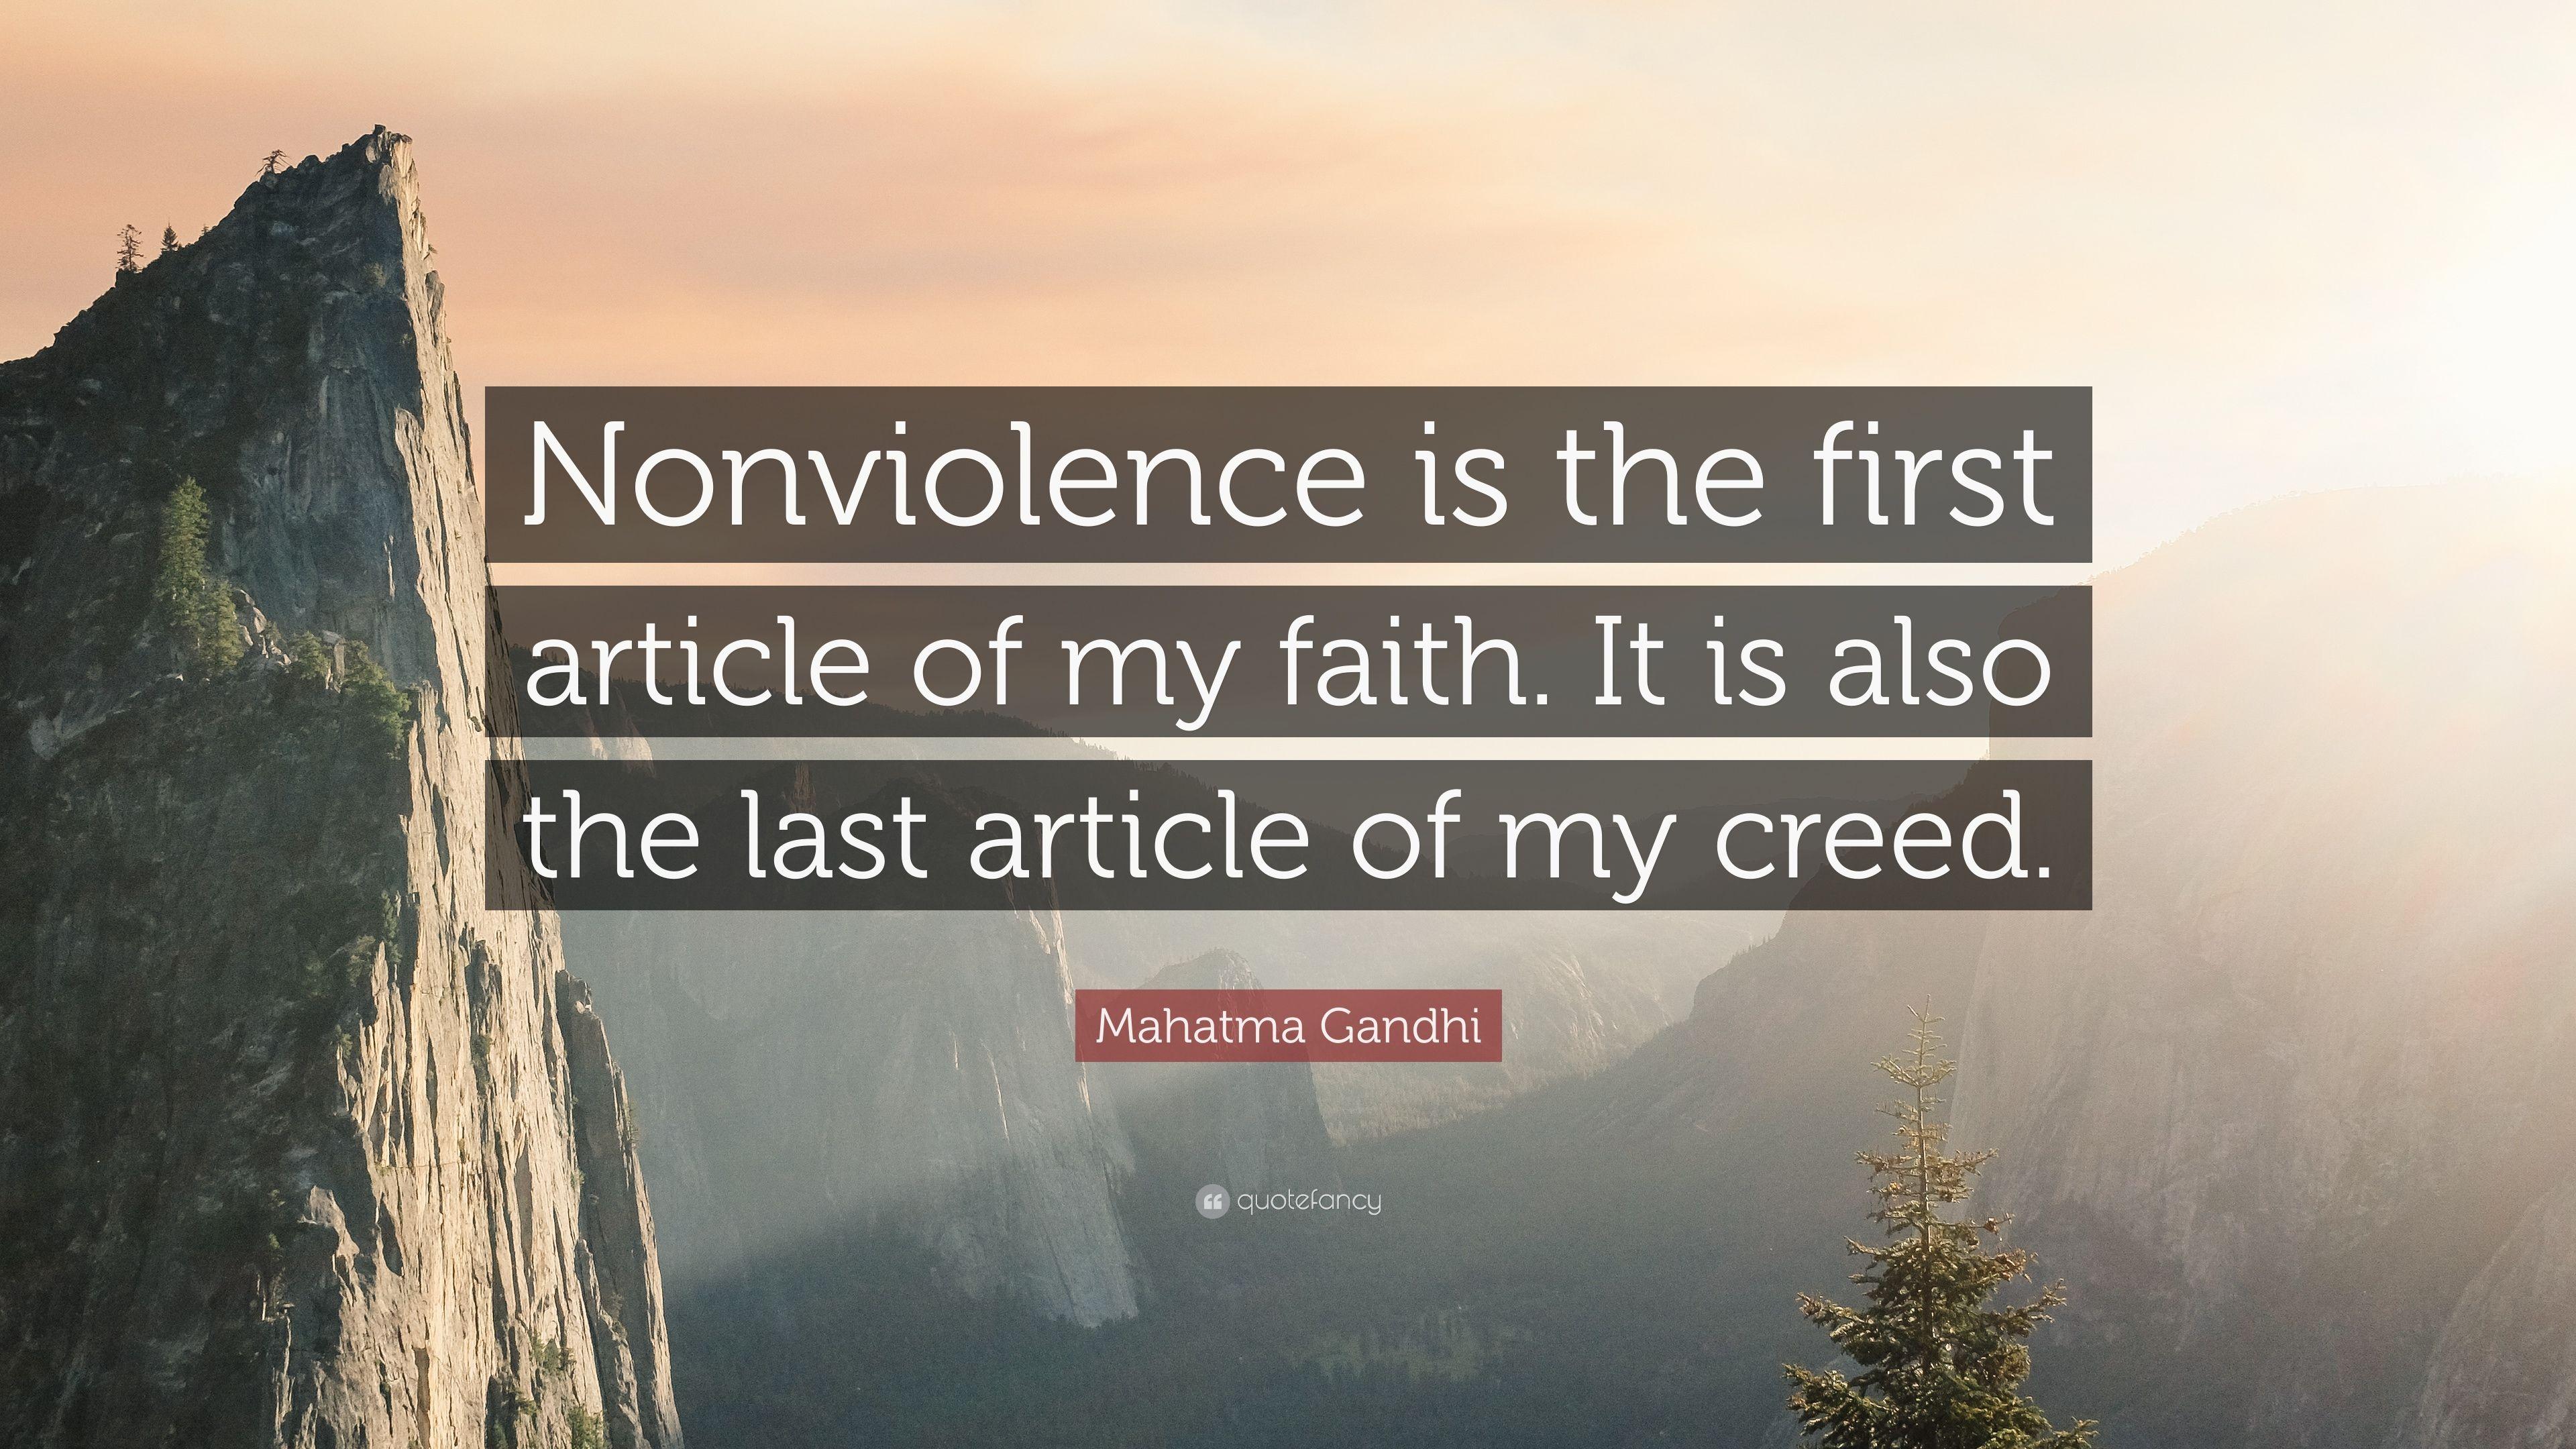 Mahatma Gandhi Quote: “Nonviolence is the first article of my faith